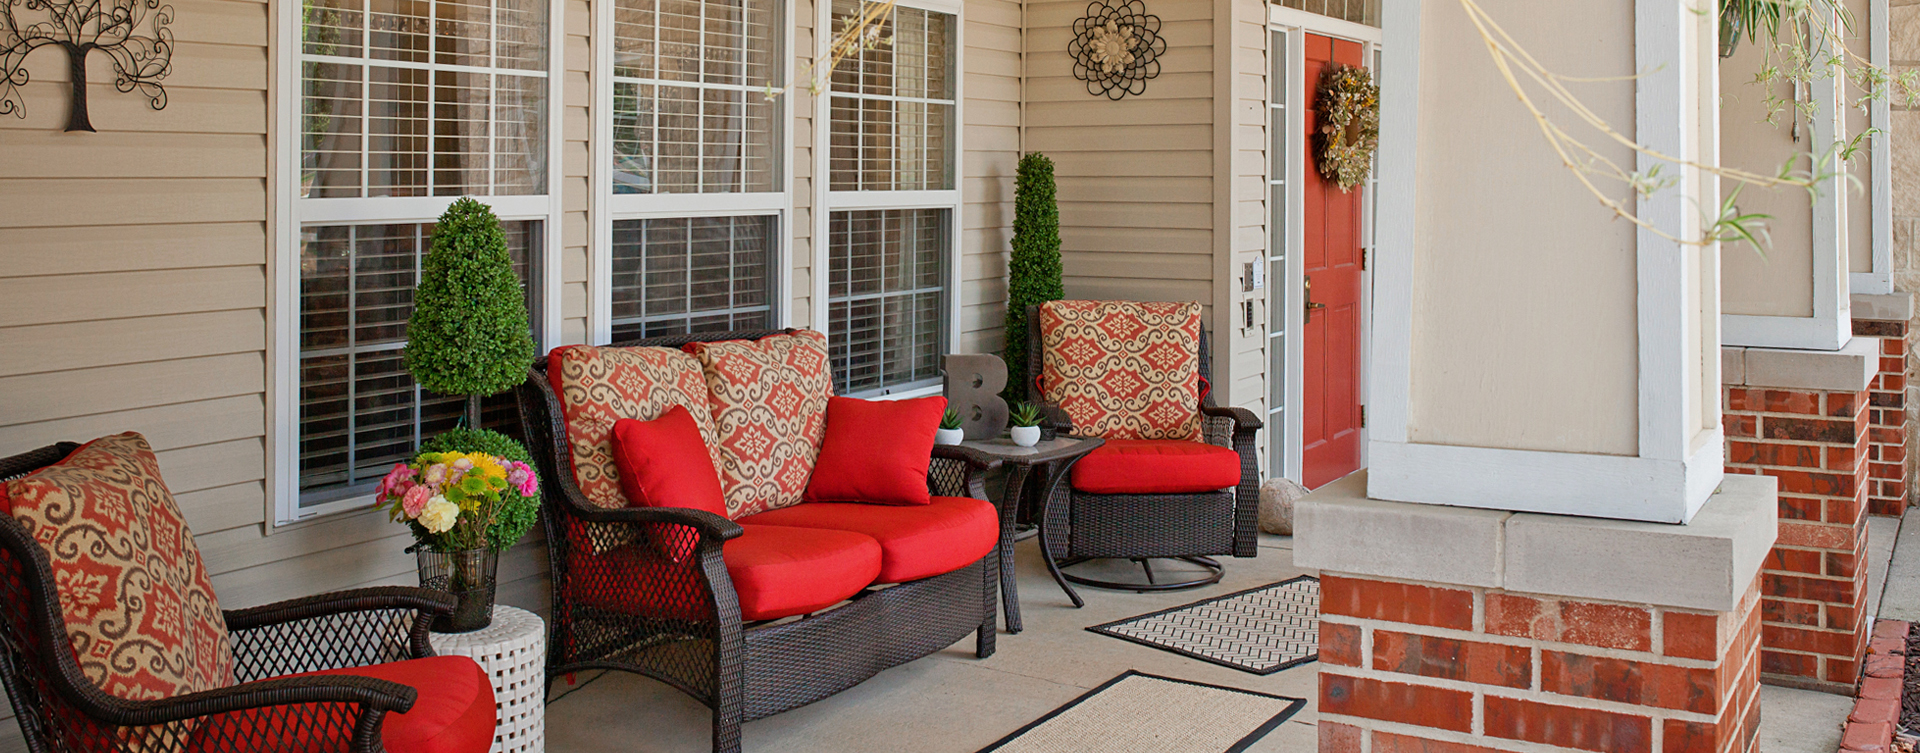 Relax in your favorite chair on the porch at Bickford of Cedar Falls